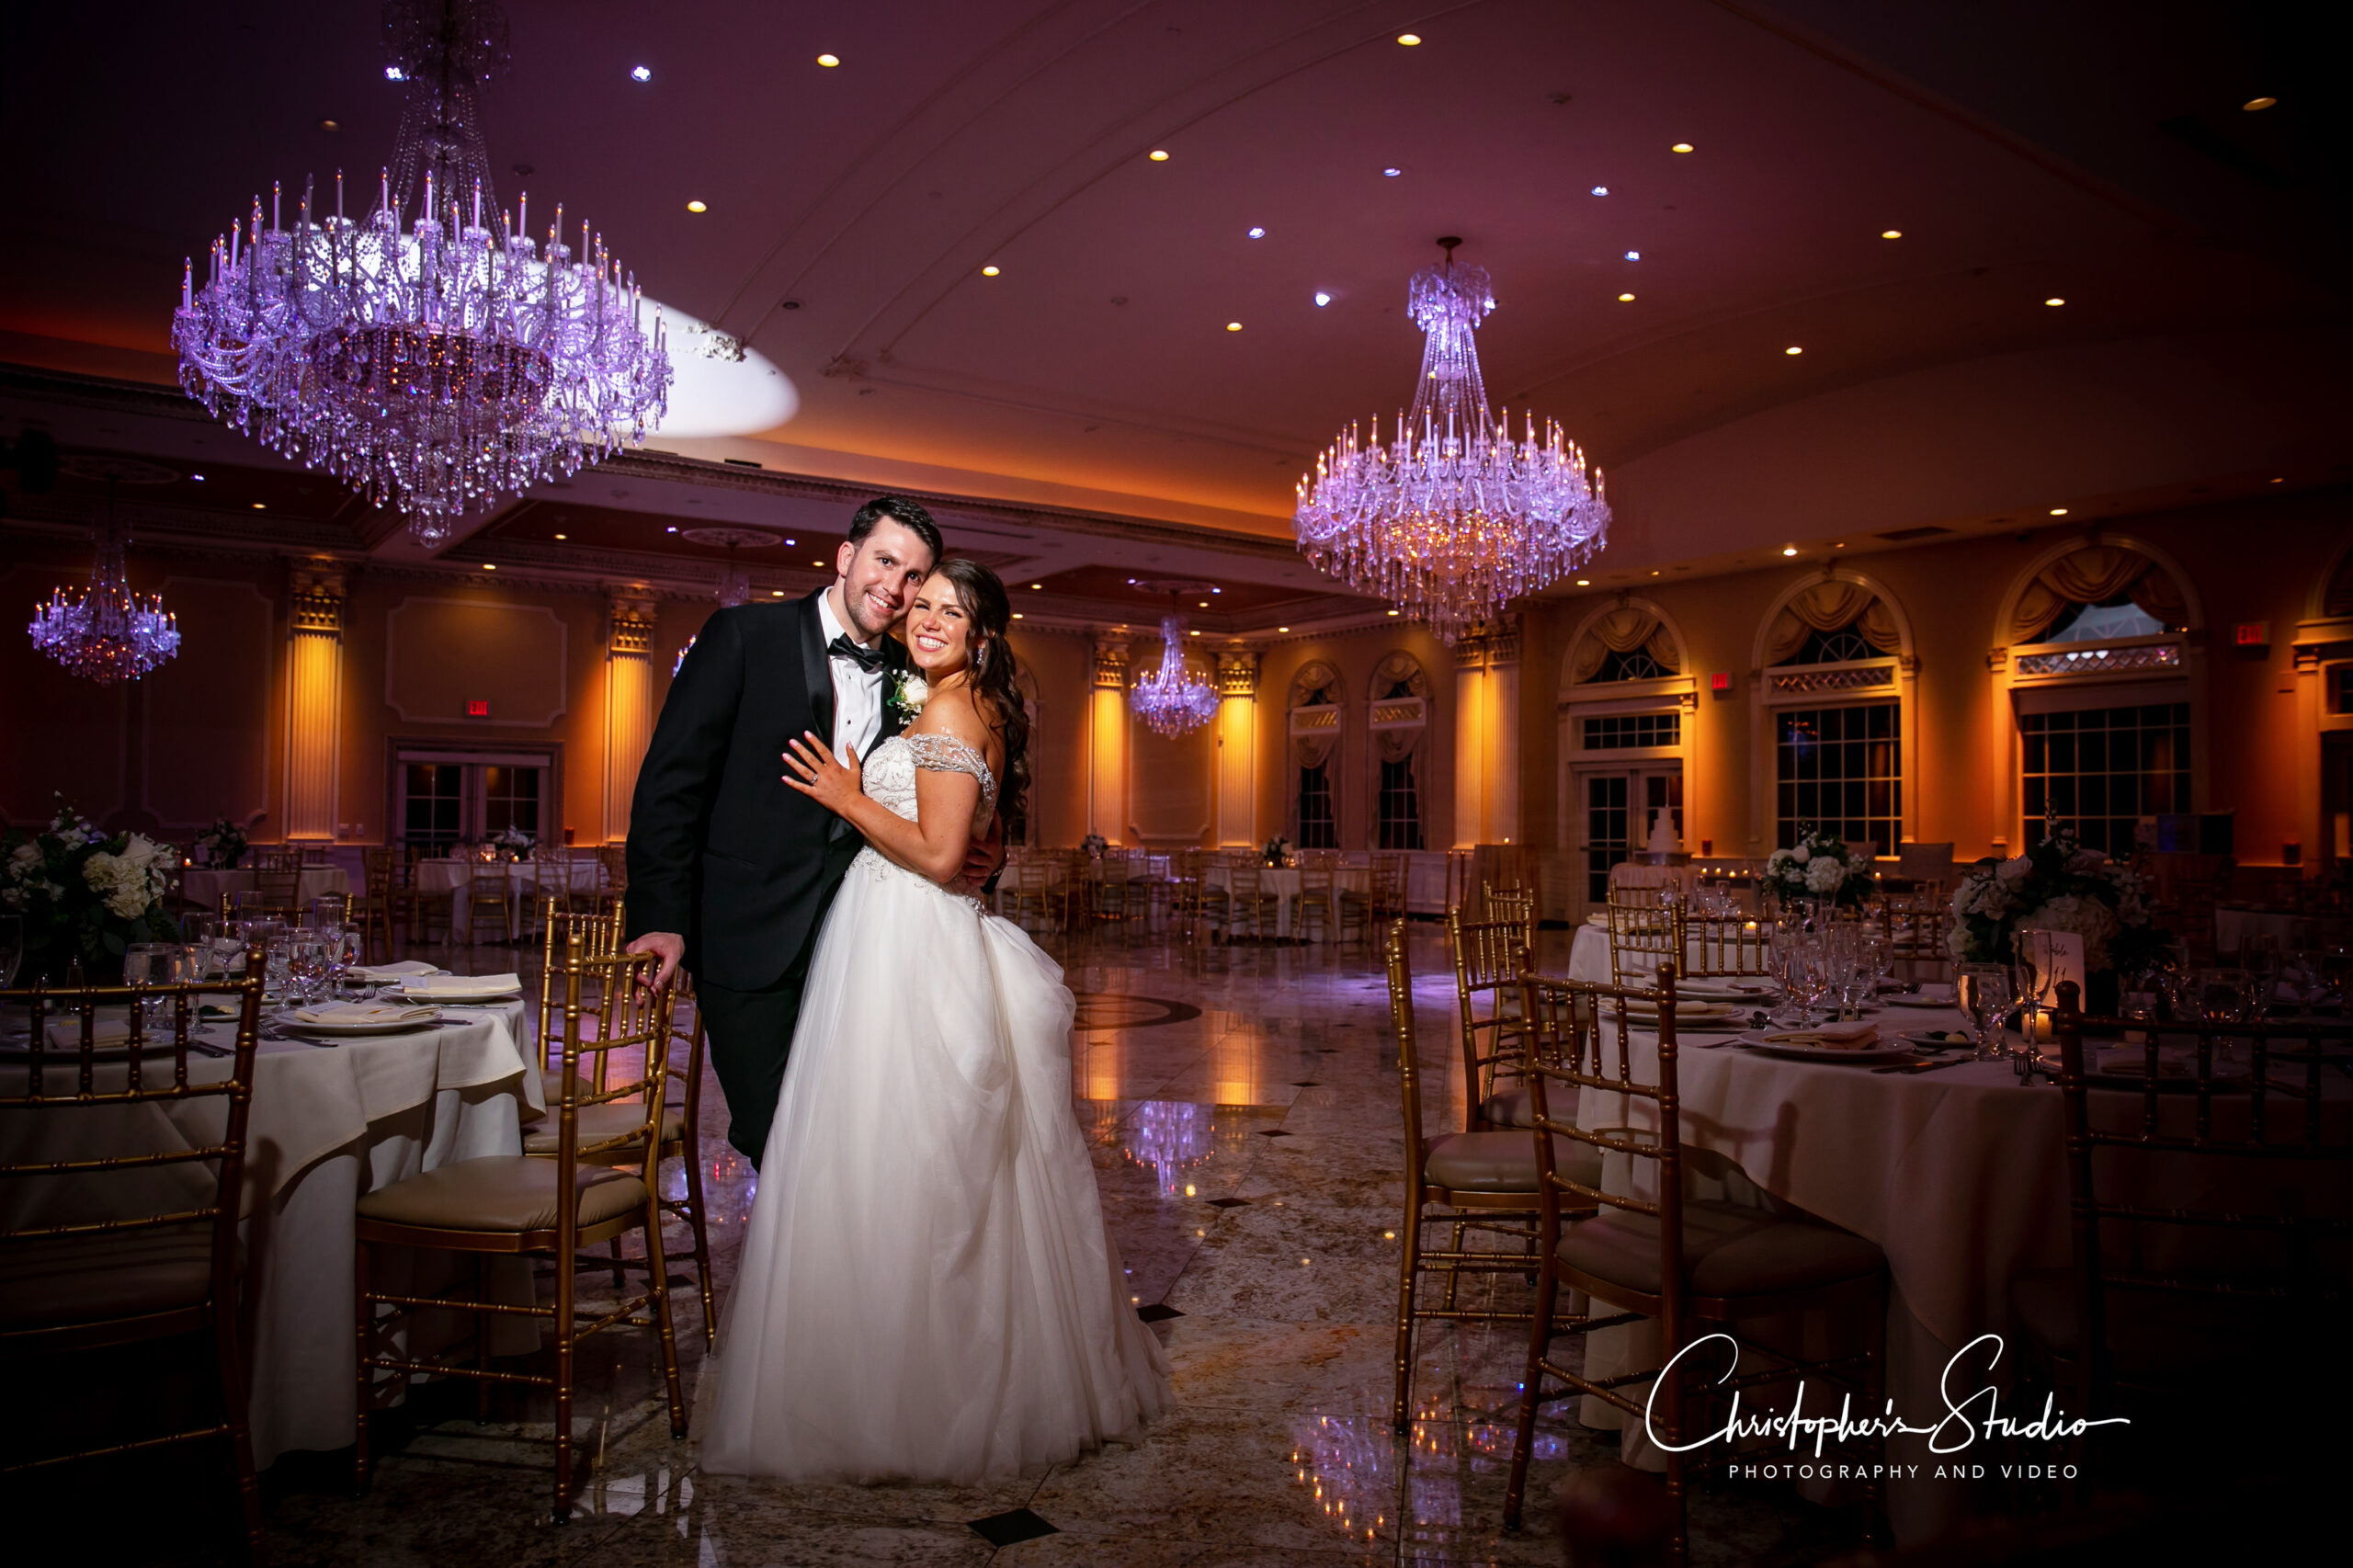 Bride and groom about to dance at The Old Tappan Manor in Old Tappan Manor NJ.